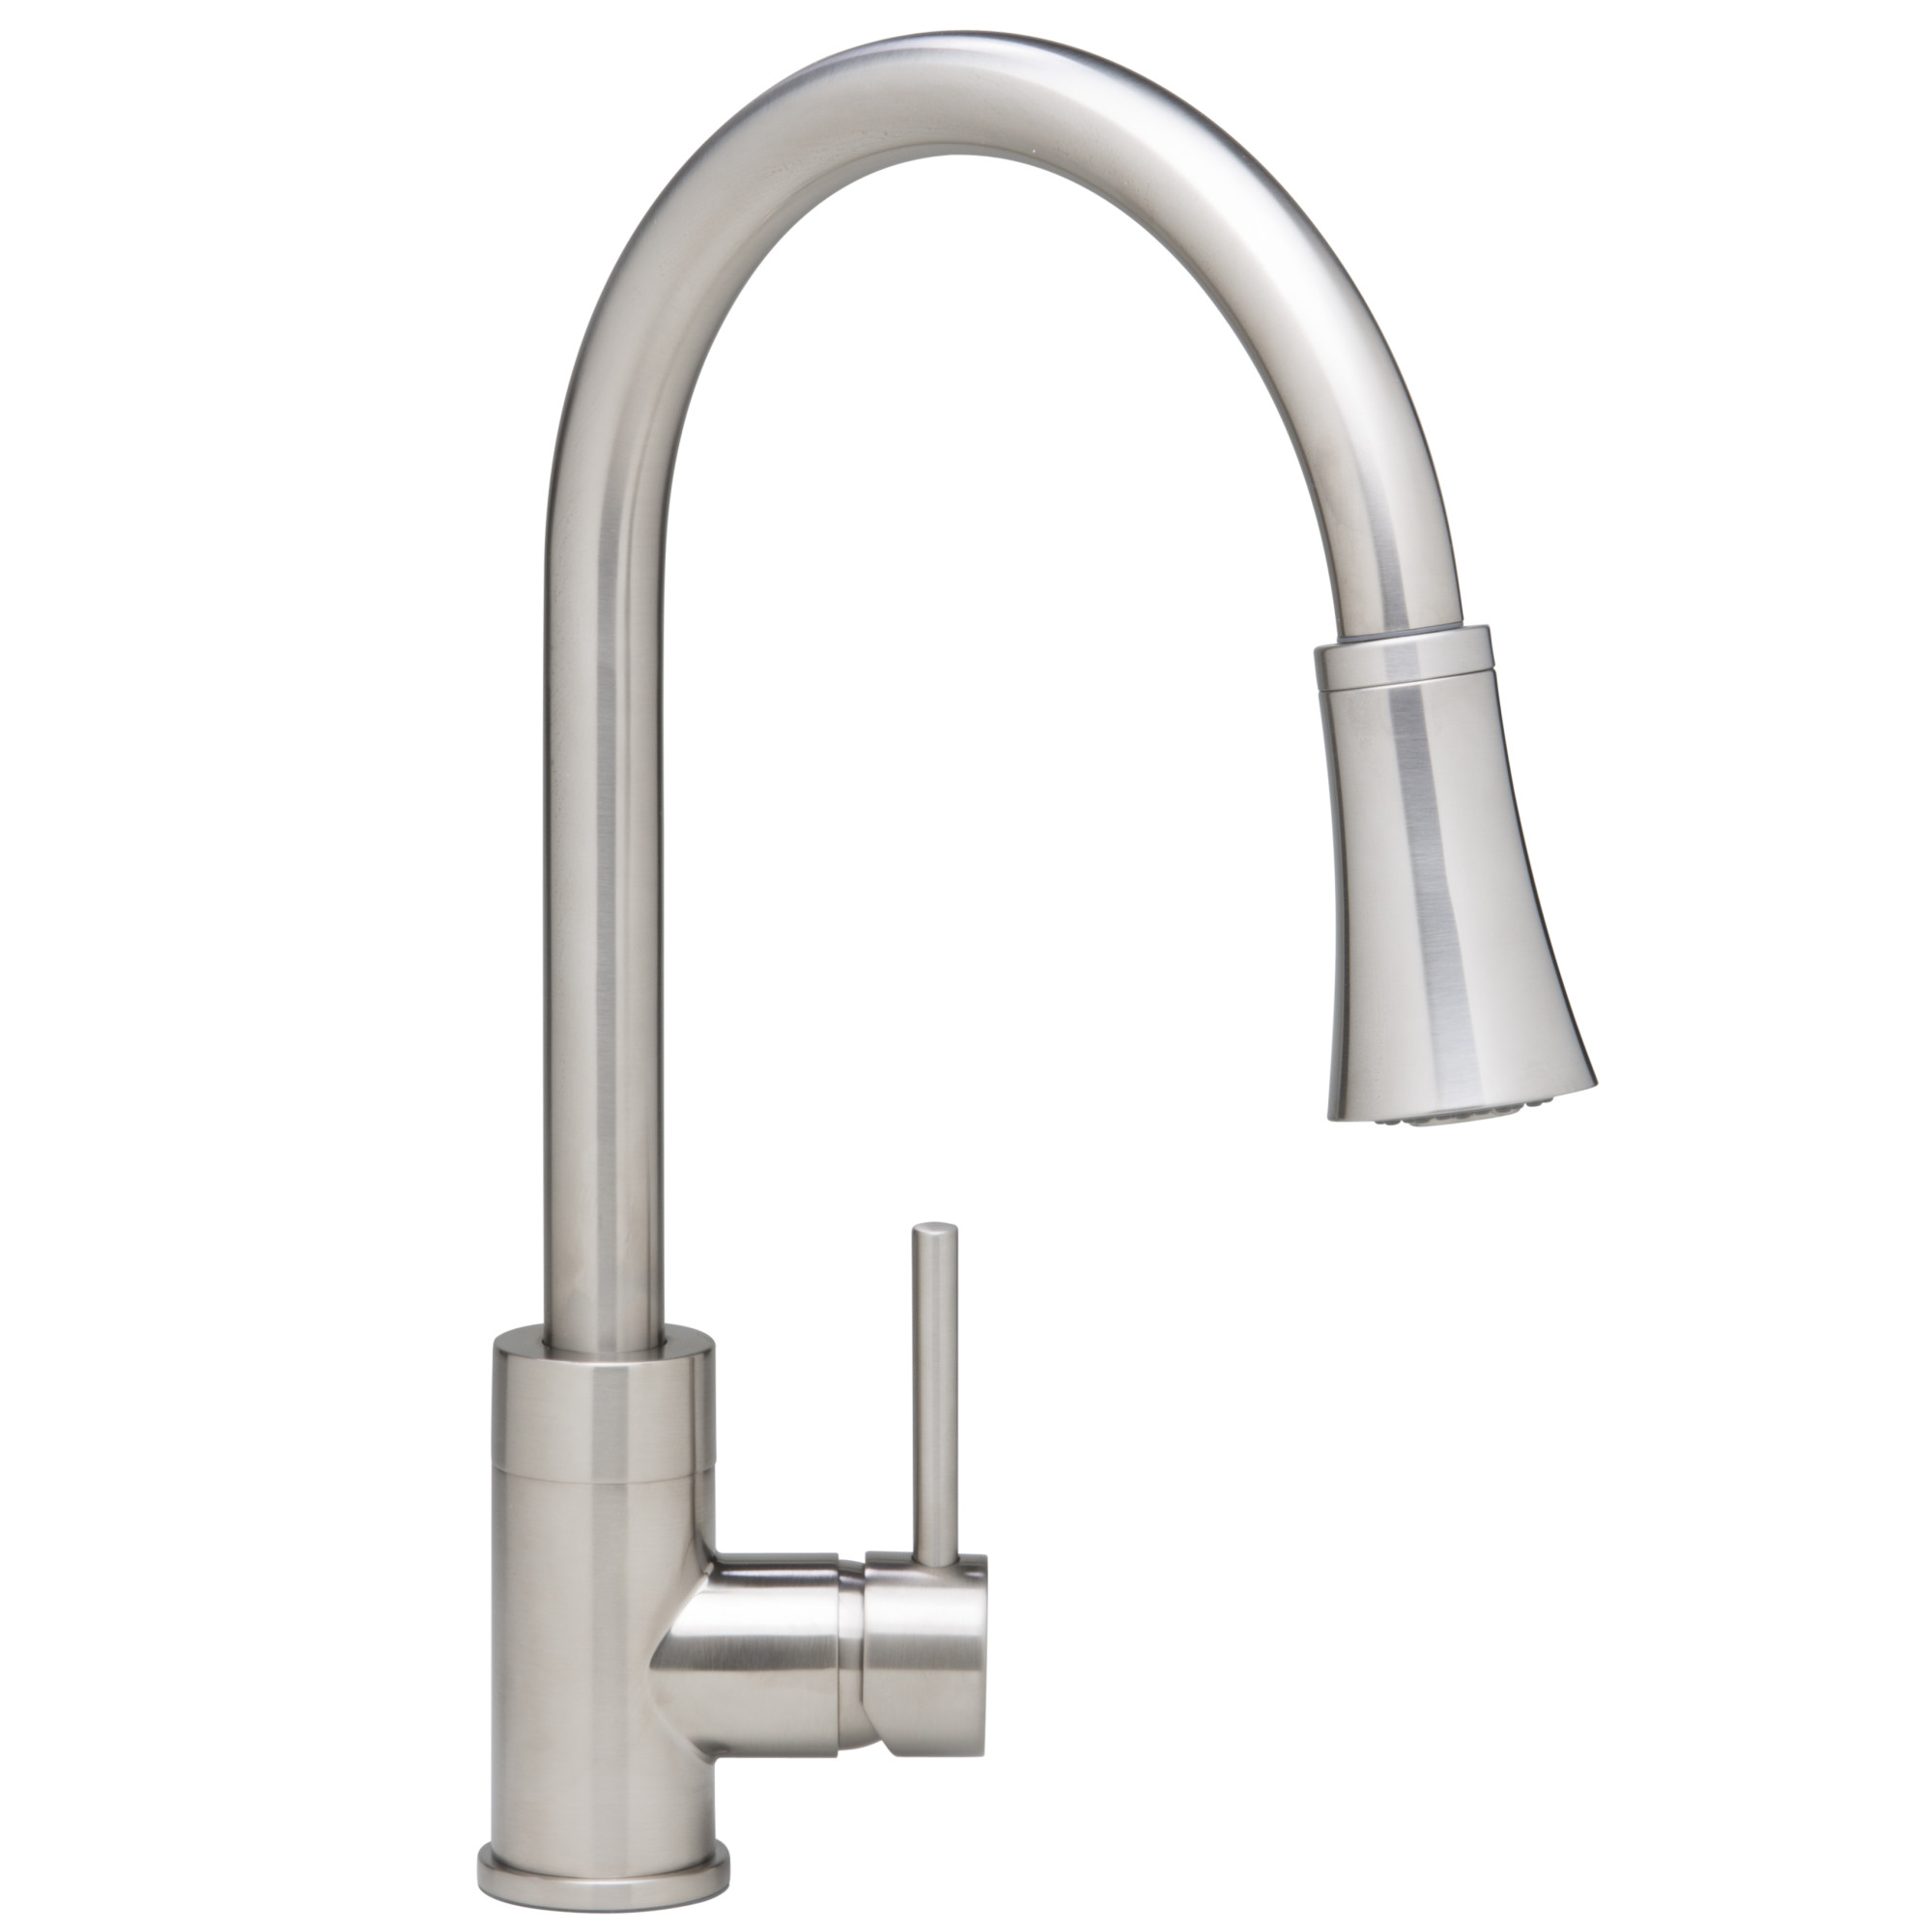 Proflo Pfxc7011 Chrome Pullout Spray Kitchen Faucet With Optional